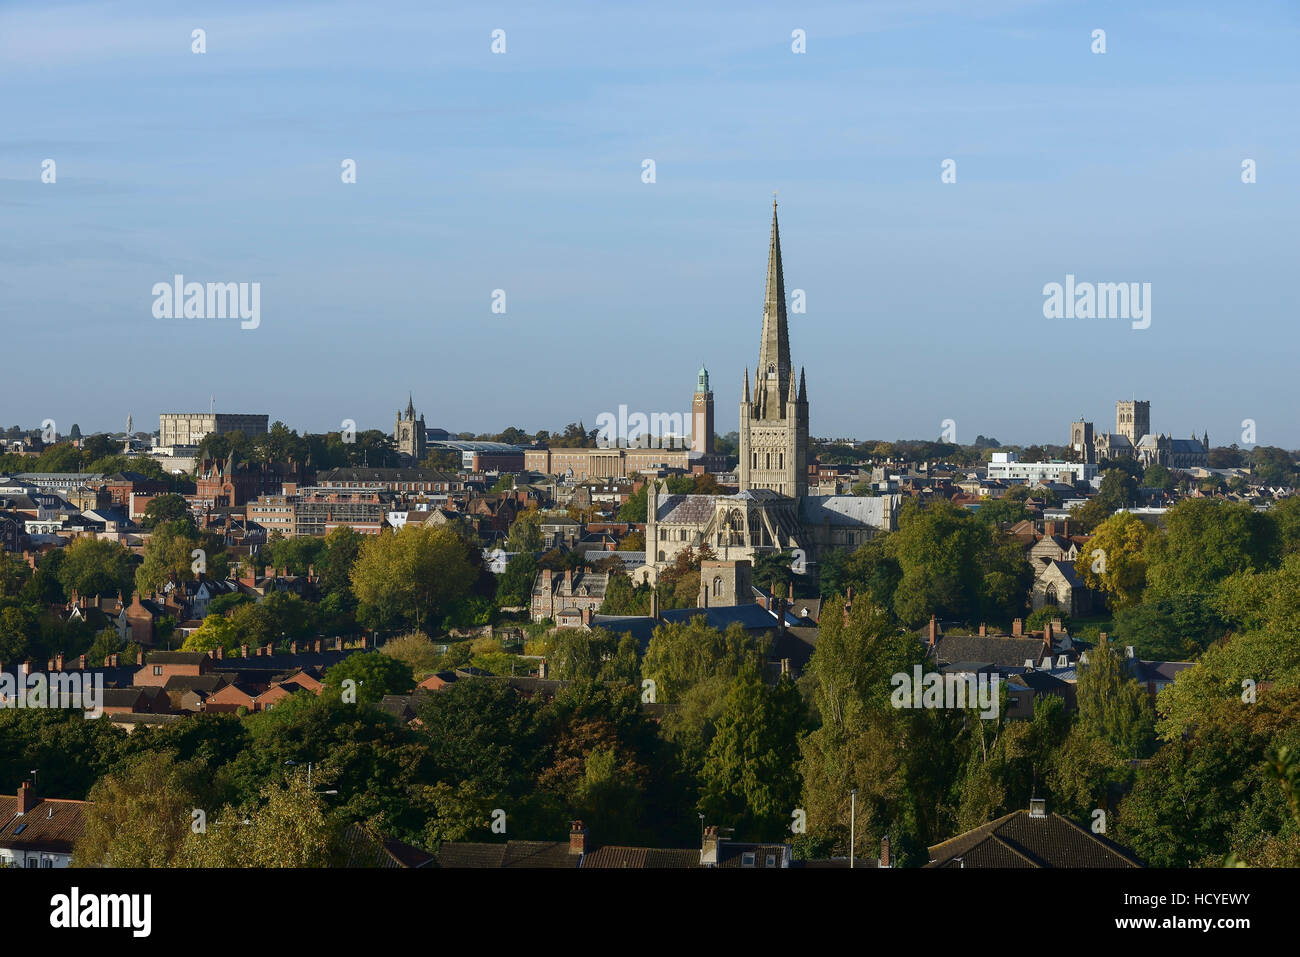 Norwich city centre skyline with the two cathedrals and landmark buildings Stock Photo